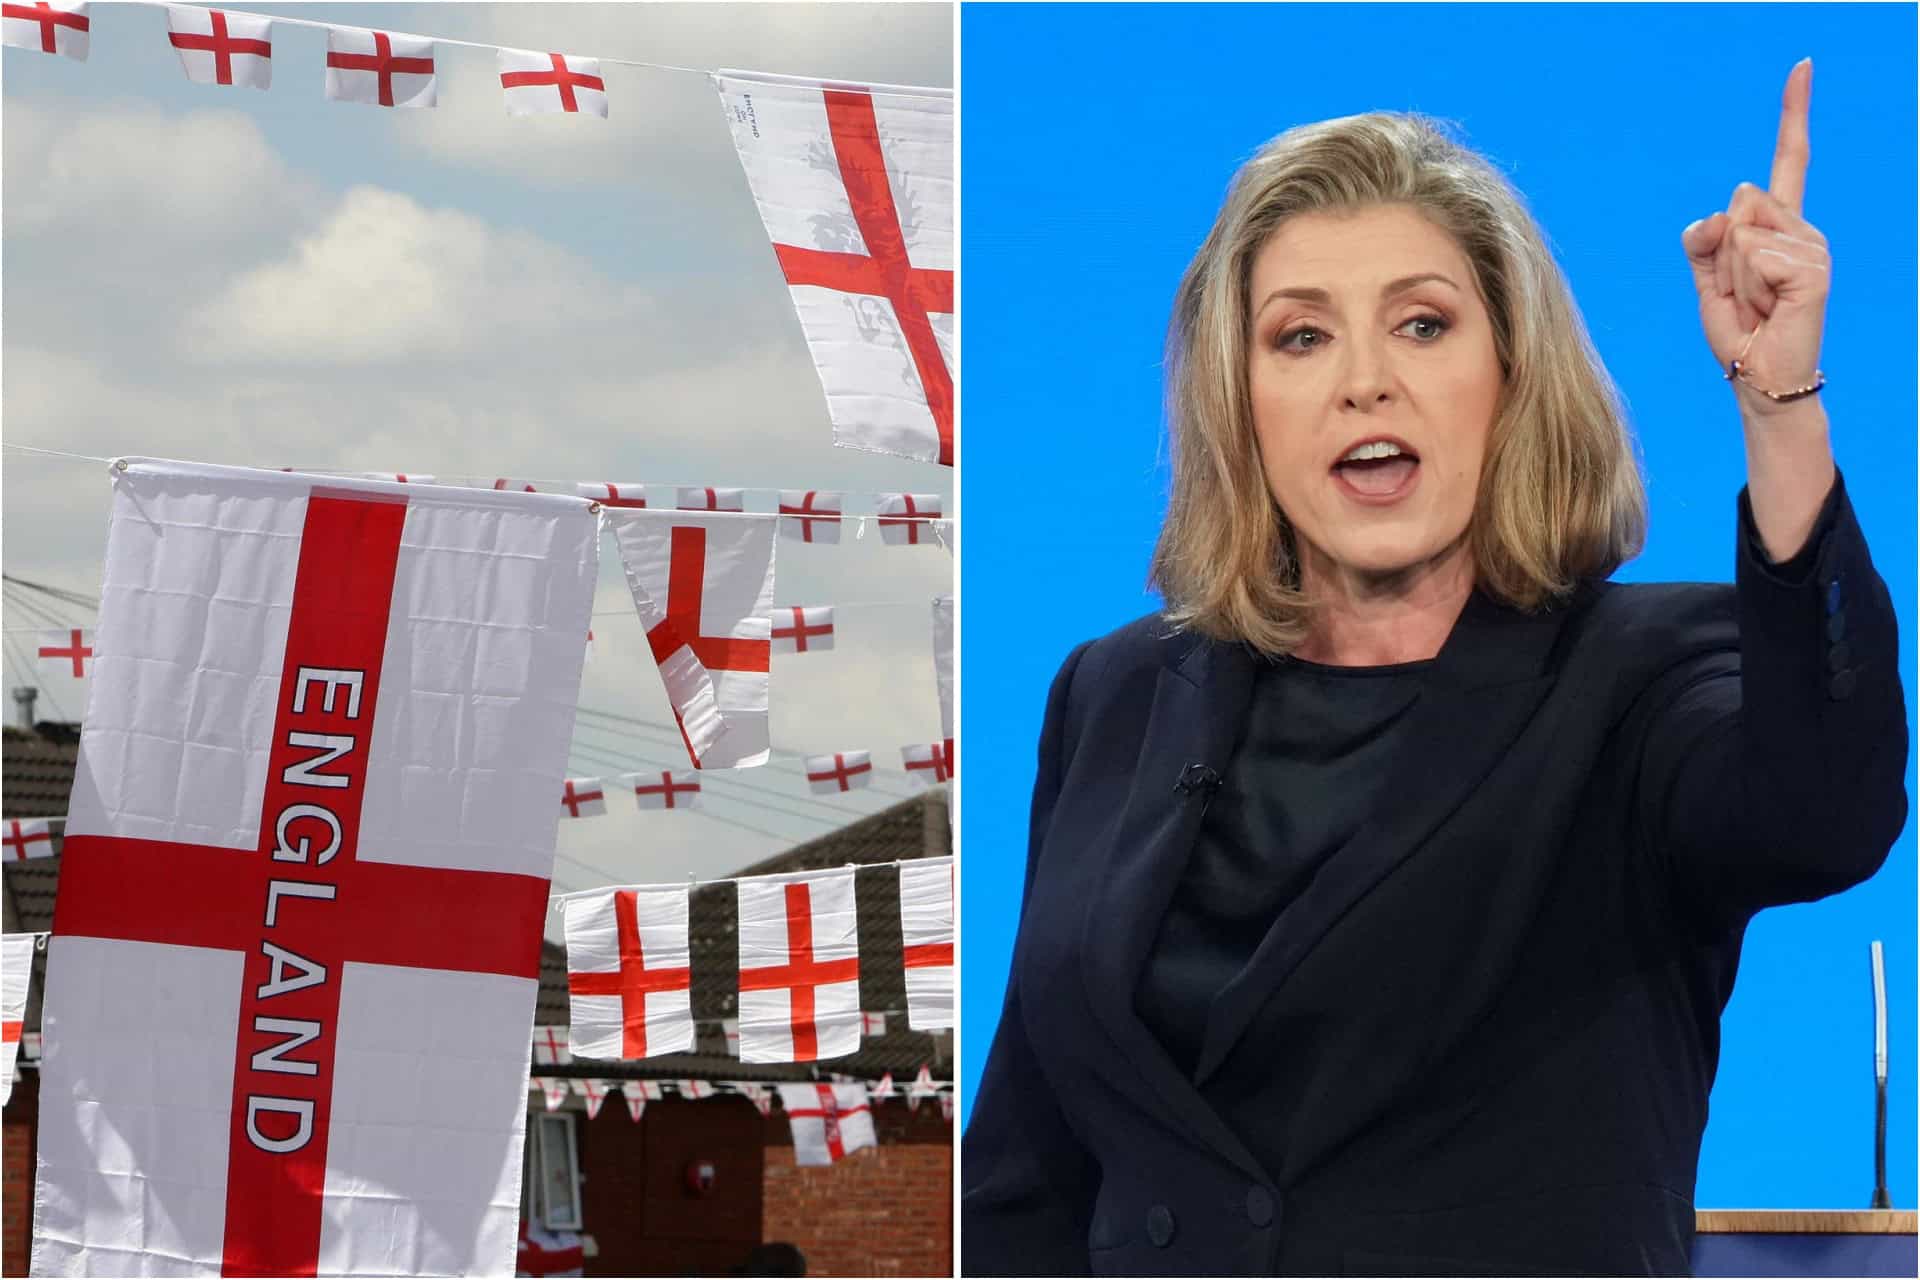 Penny Mordaunt accuses Labour of sneering at St George’s Cross flag